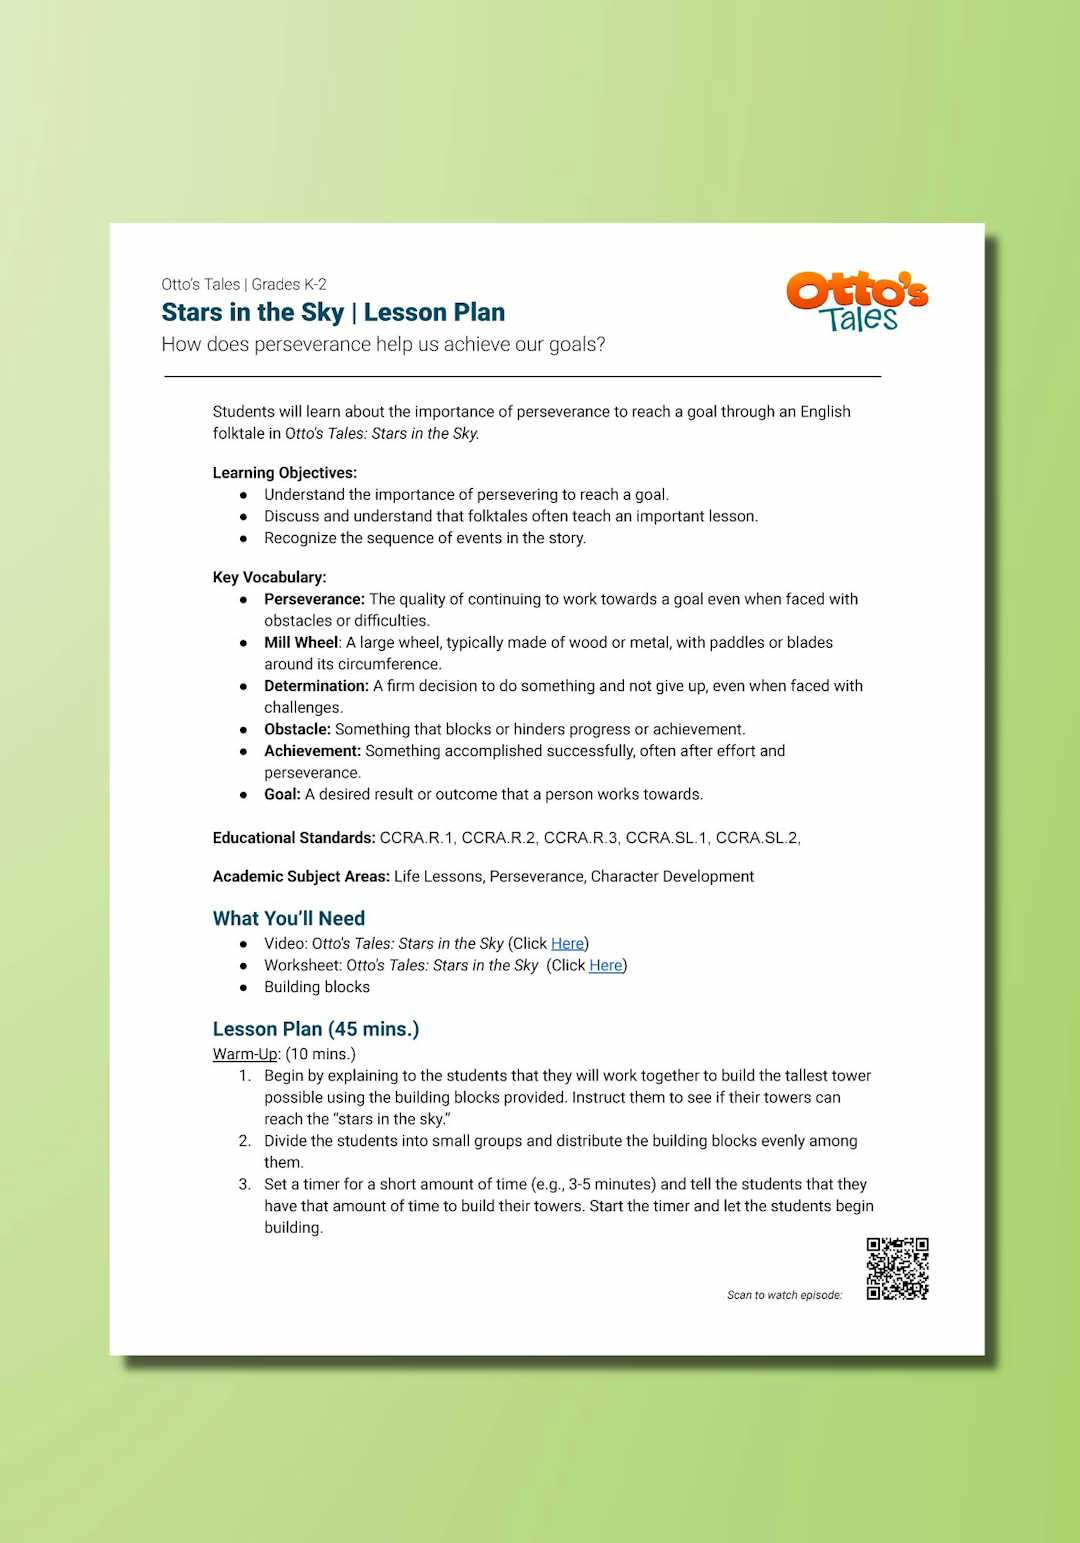 "Otto's Tales: Stars in the Sky" Lesson Plan